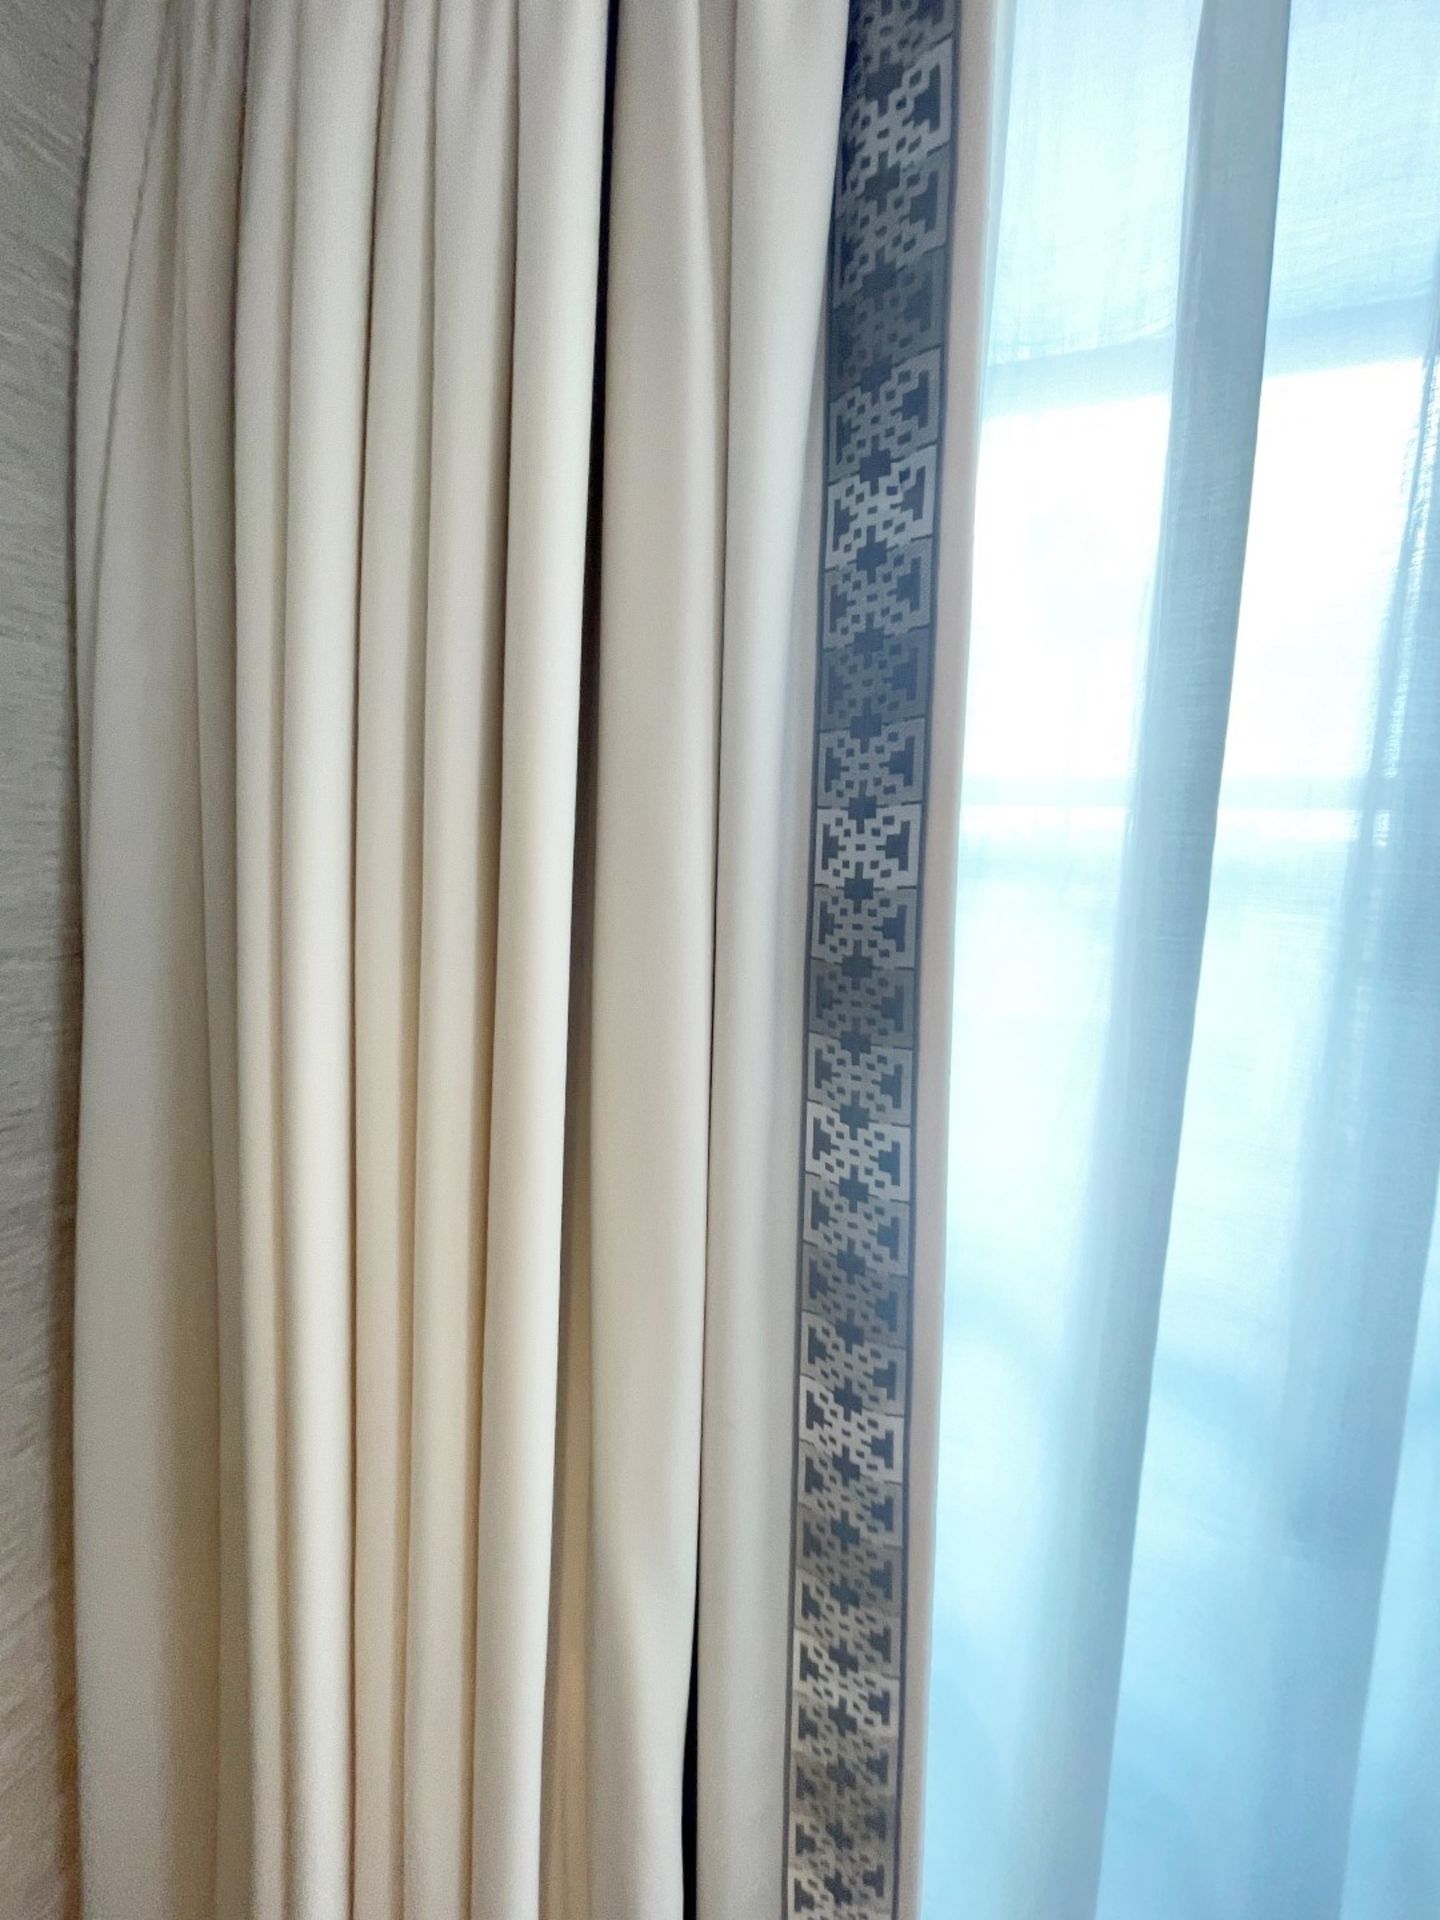 4 x Bespoke Made To Measure Premium Lined Curtains - Includes 1 x Pair & 2 x Single Blinds + Voiles - Image 6 of 13